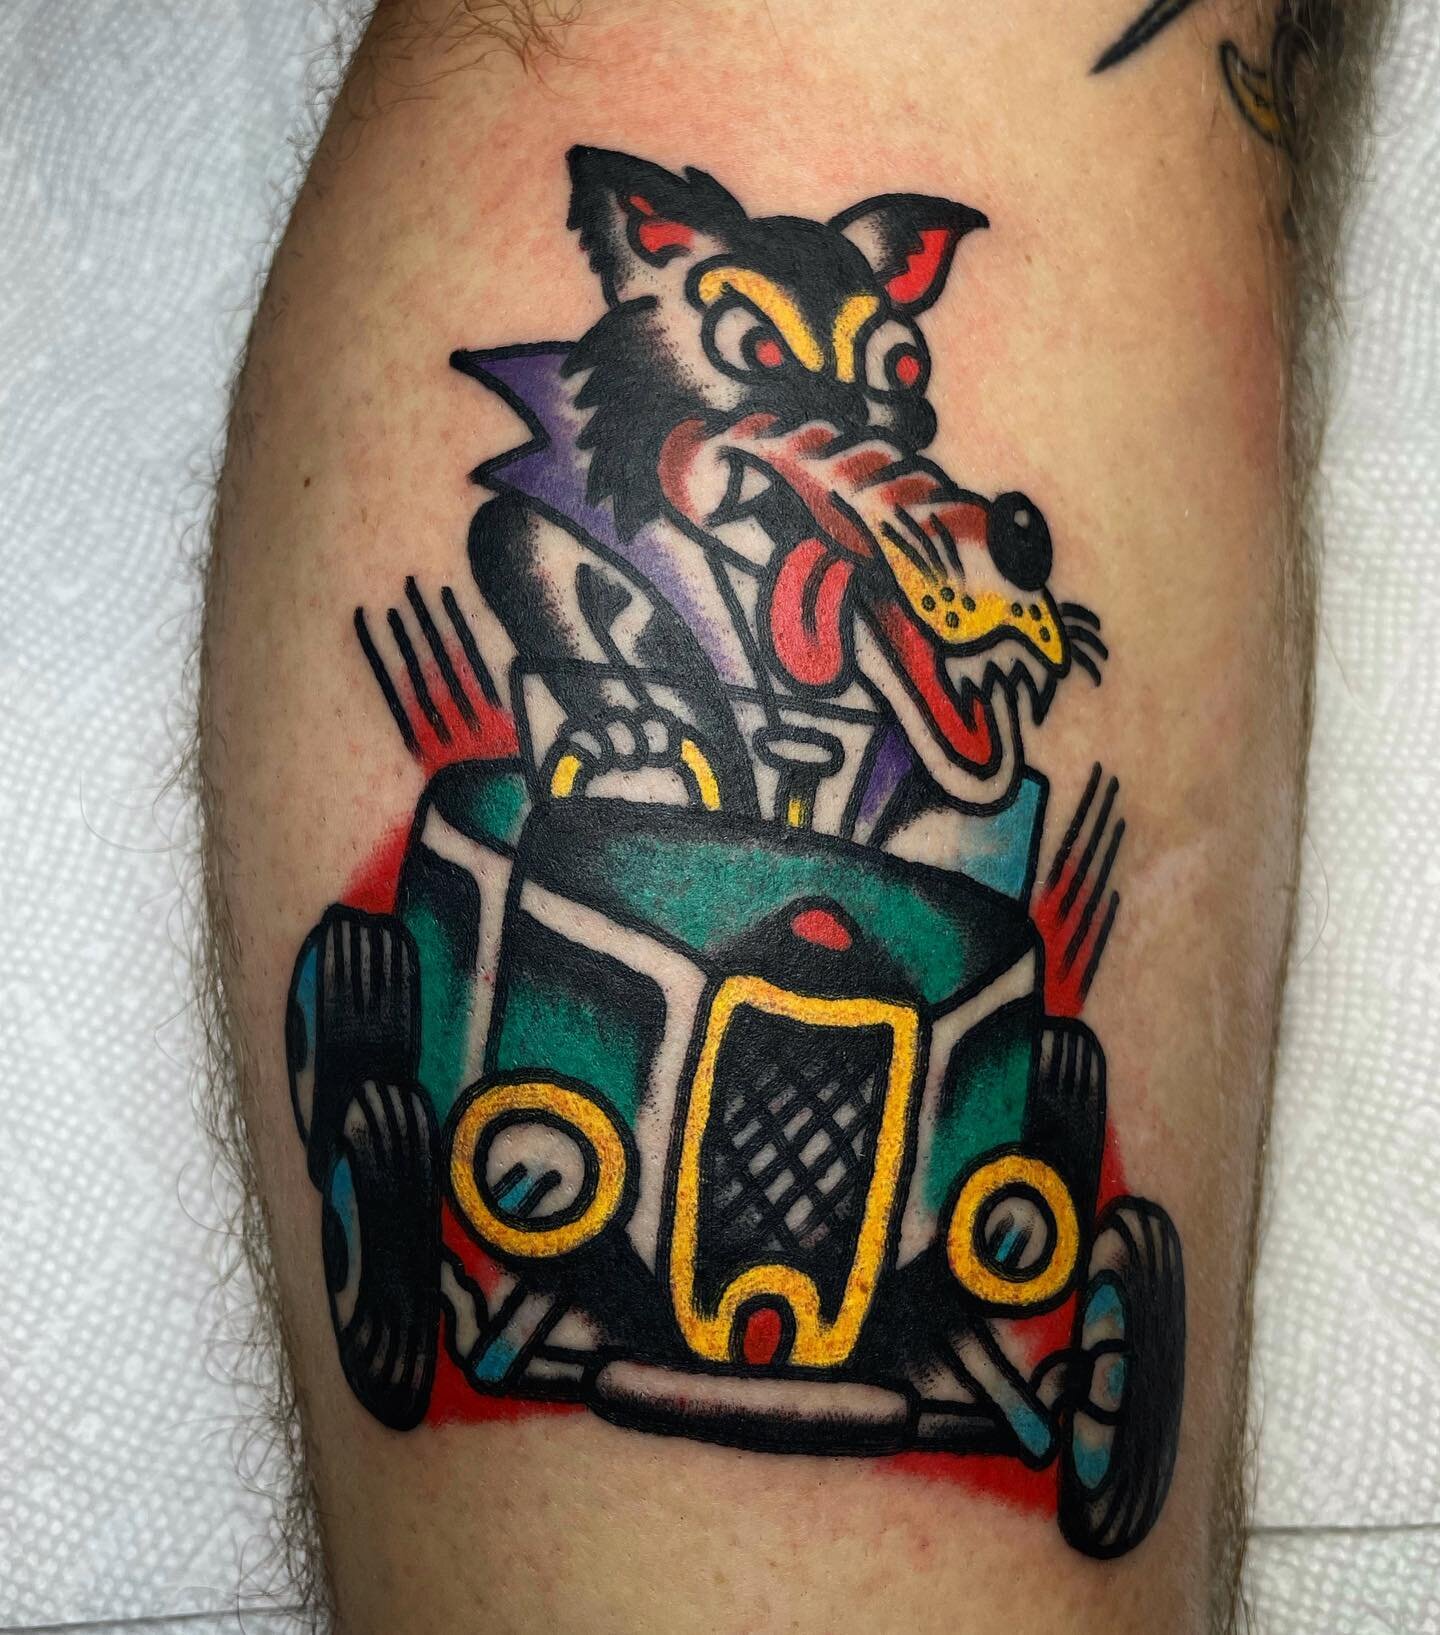 Who is your road dawg? @riversidetattootn